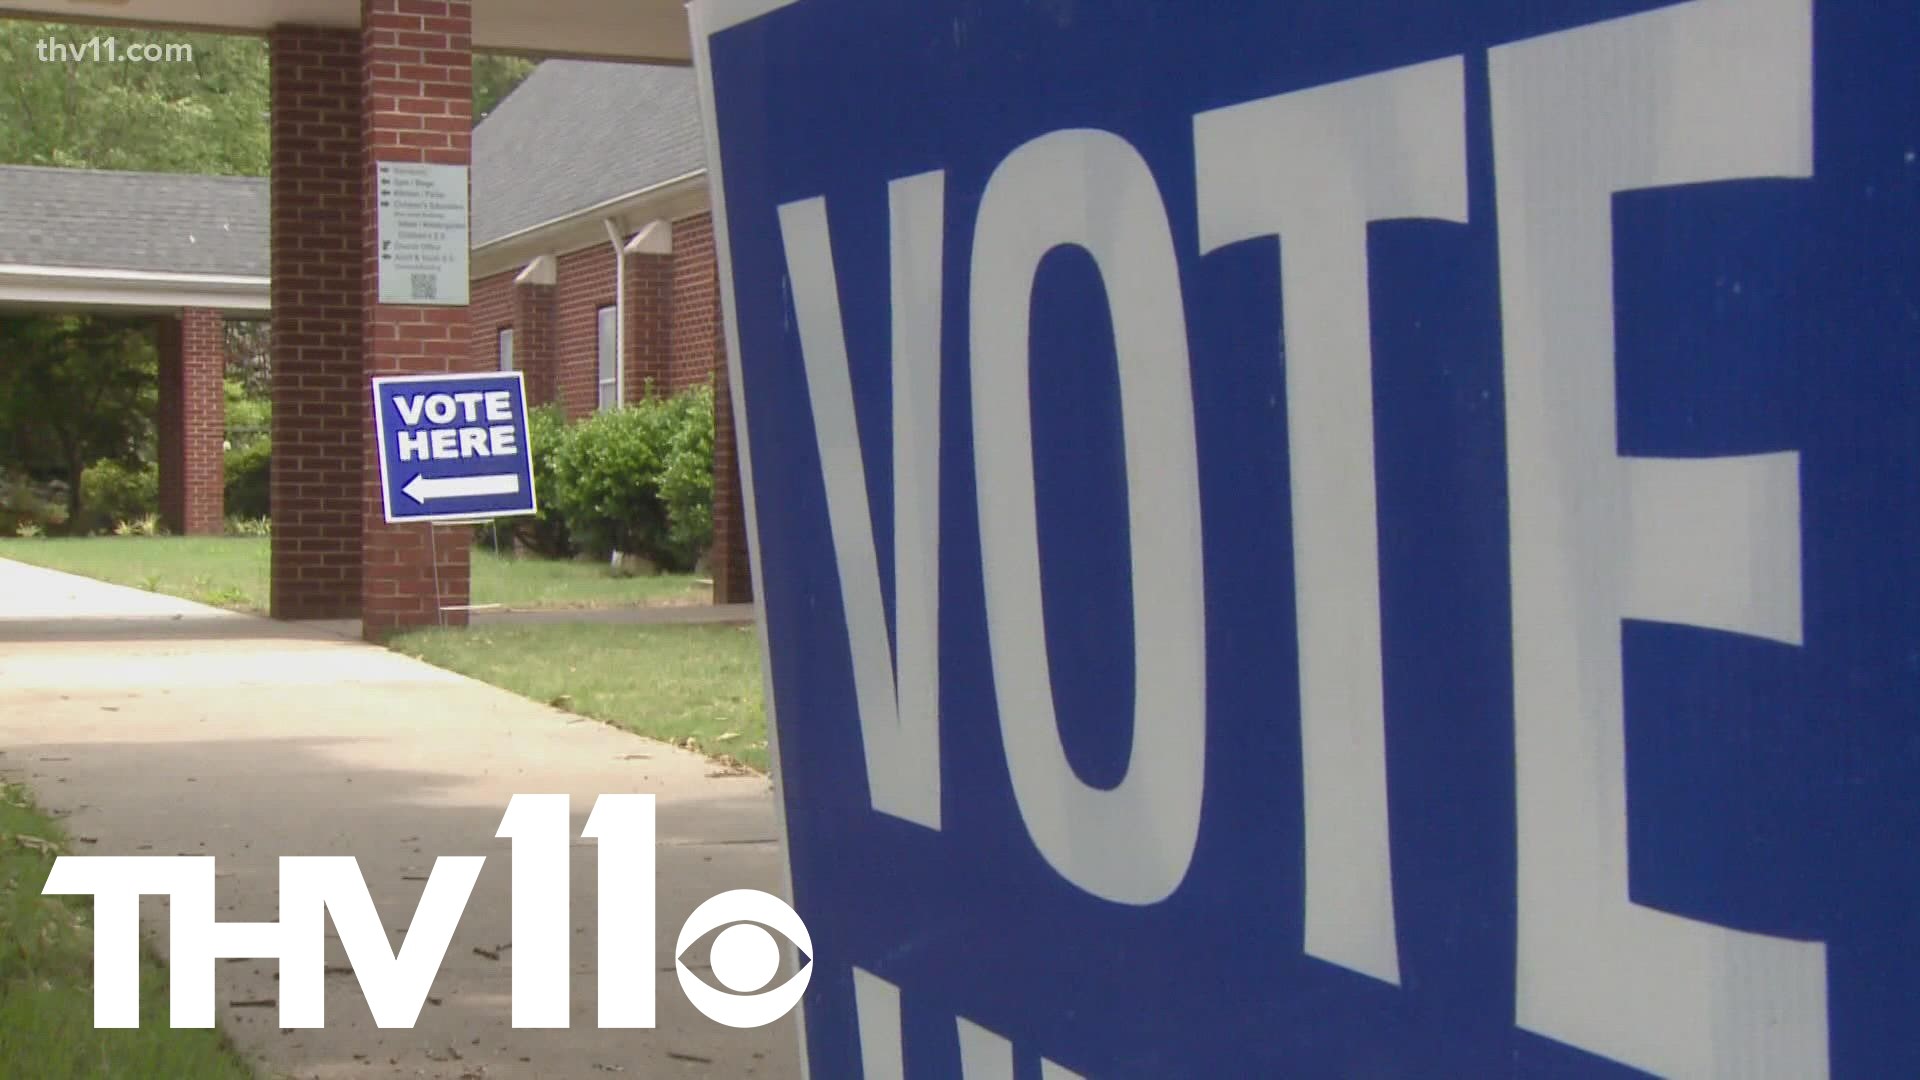 In a special election just over a week away, both Little Rock and North Little Rock residents will vote to decide whether or not to implement taxes.